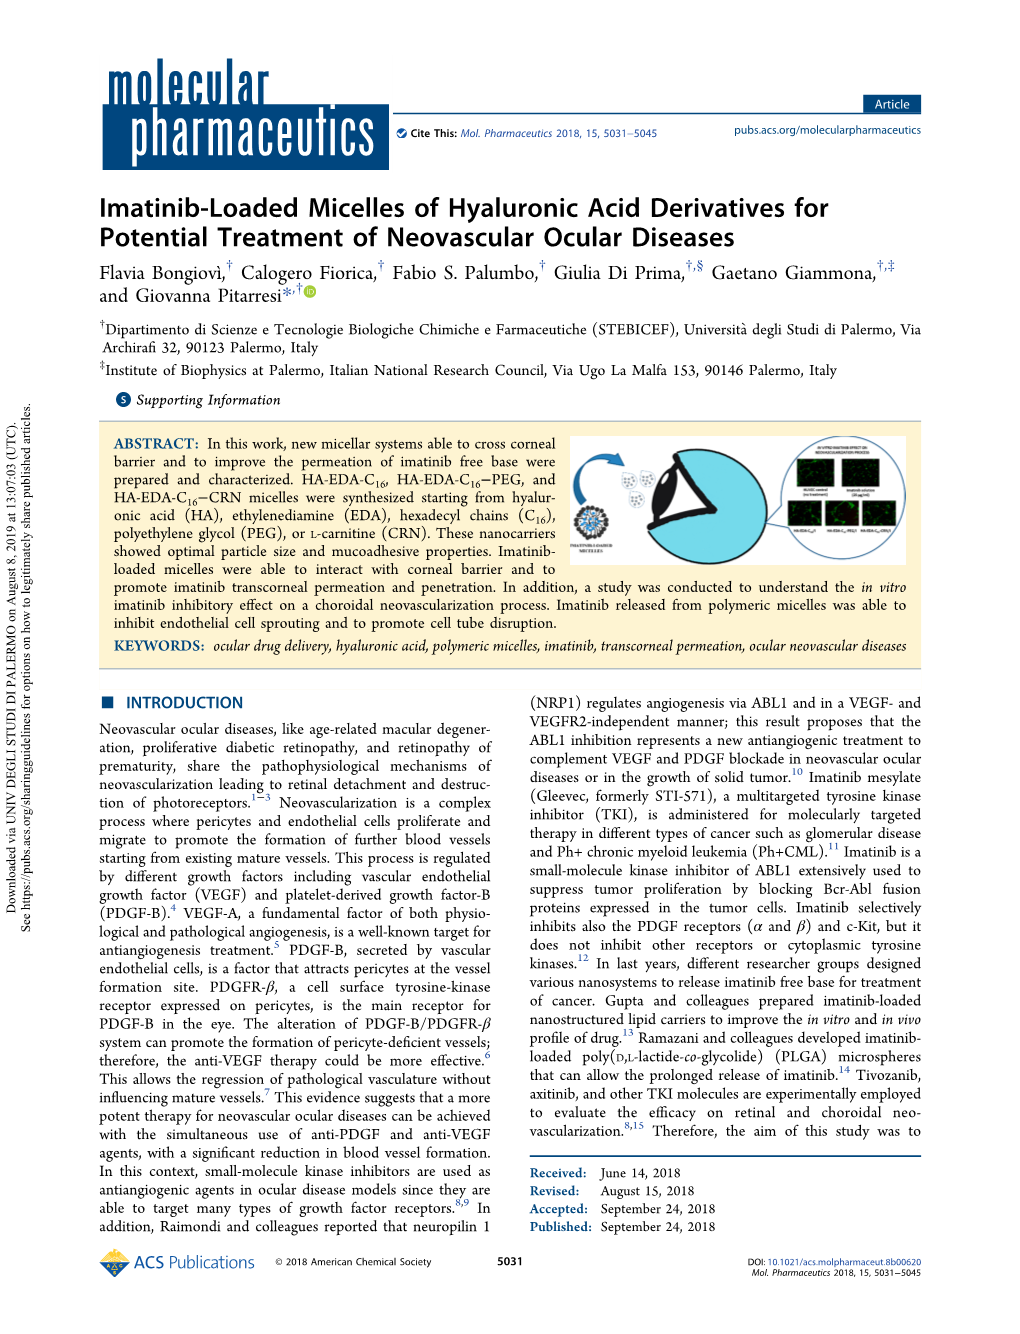 Imatinib-Loaded Micelles of Hyaluronic Acid Derivatives For